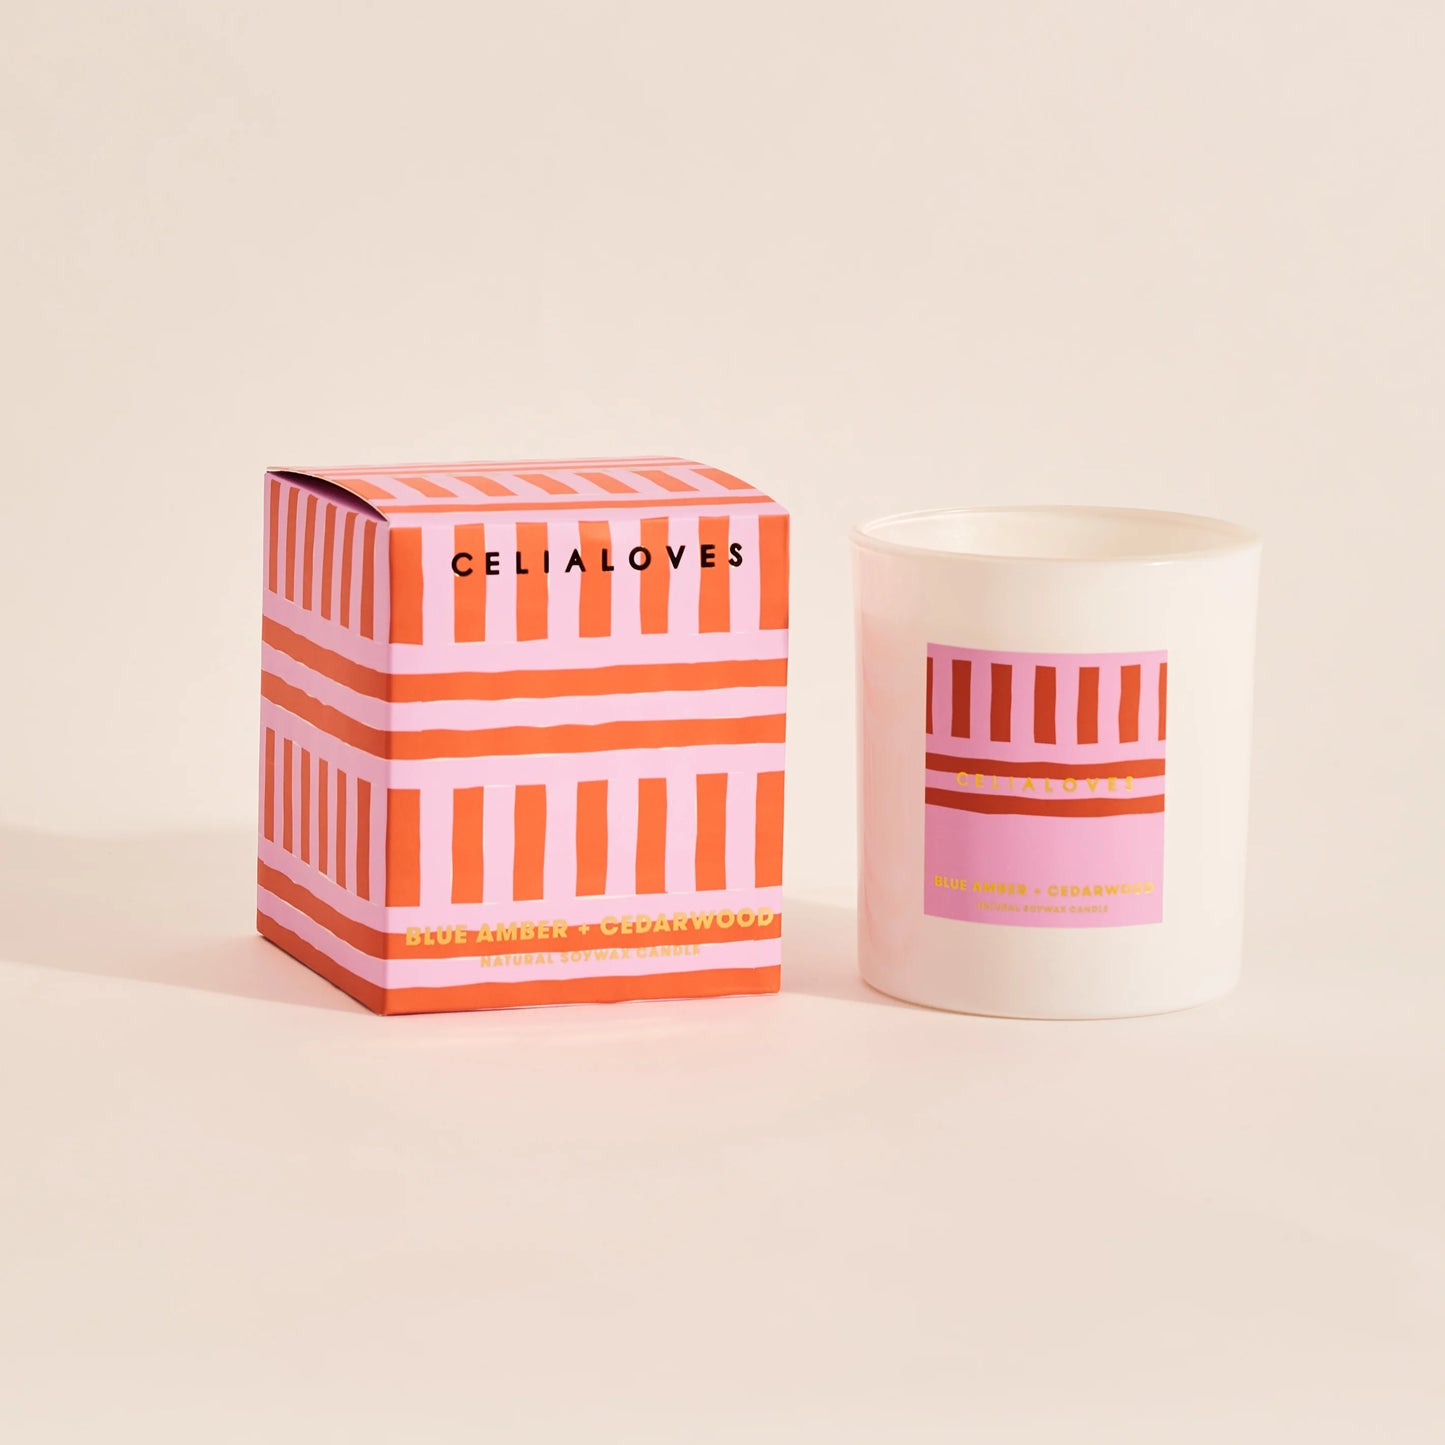 Celia Loves - 80hr Soy Candle